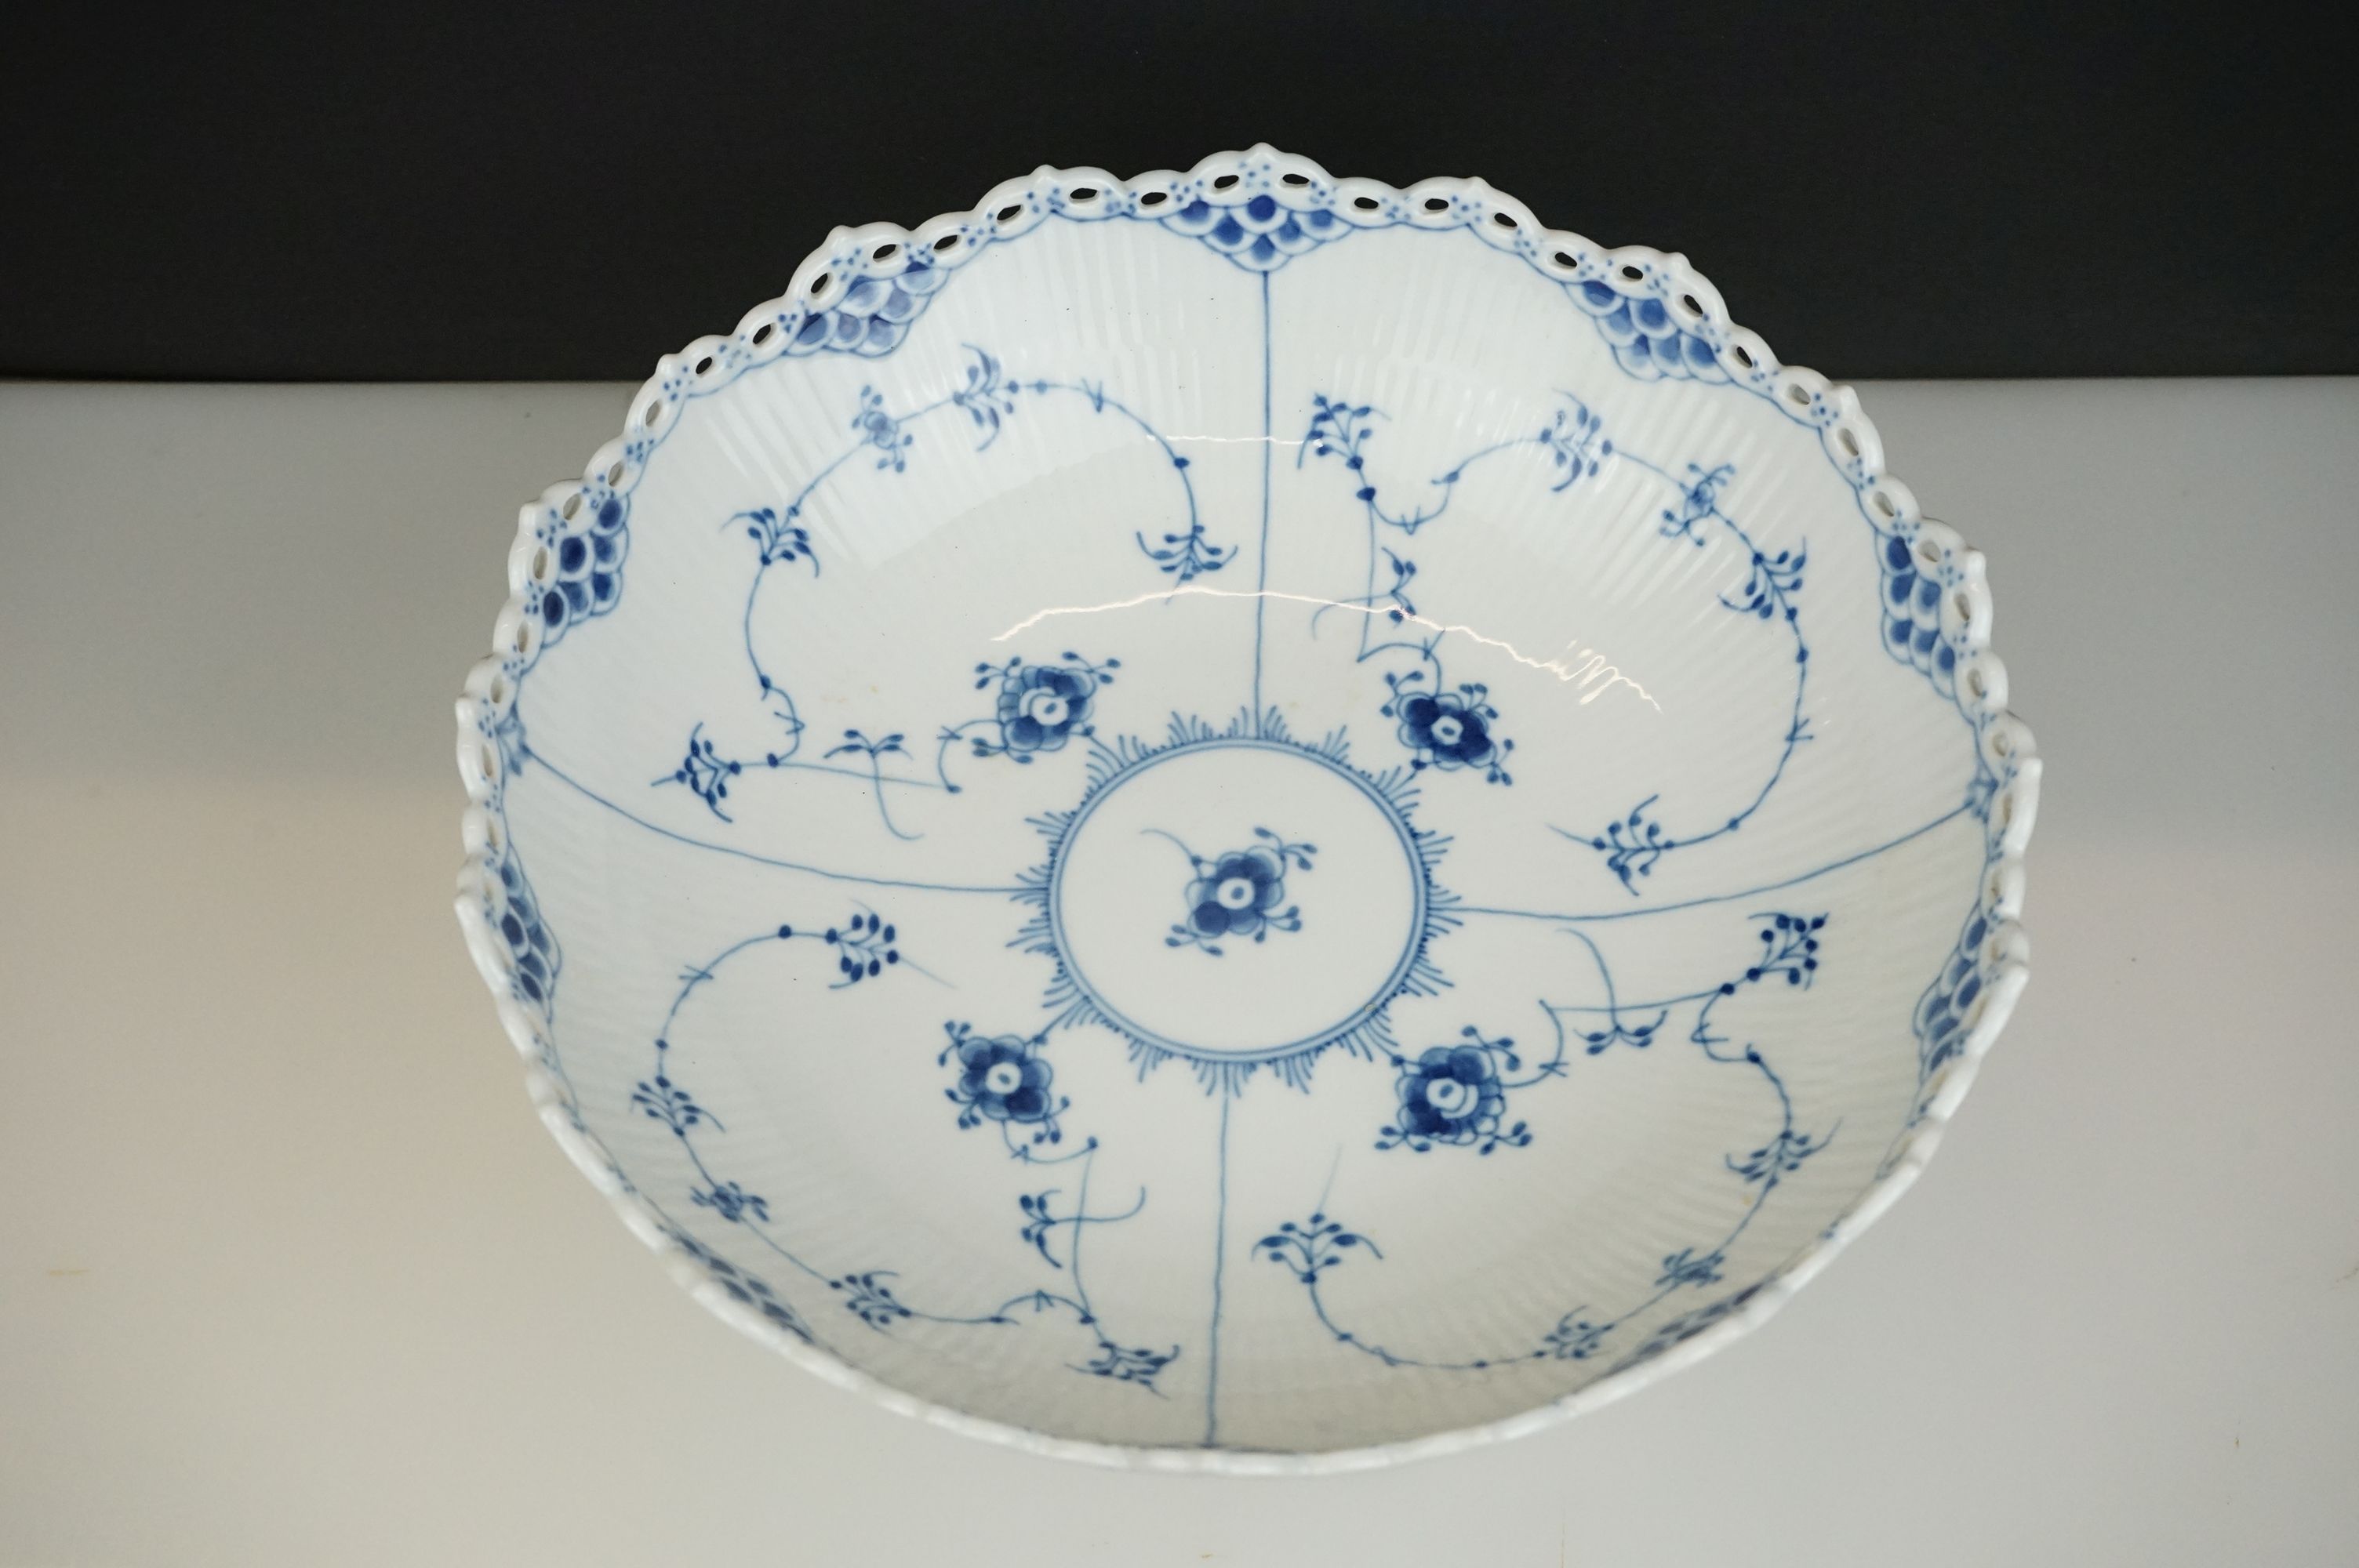 Royal Copenhagen Porcelain Tazza decorated in underglaze blue in the onion pattern, marked 1/1022, - Image 2 of 8